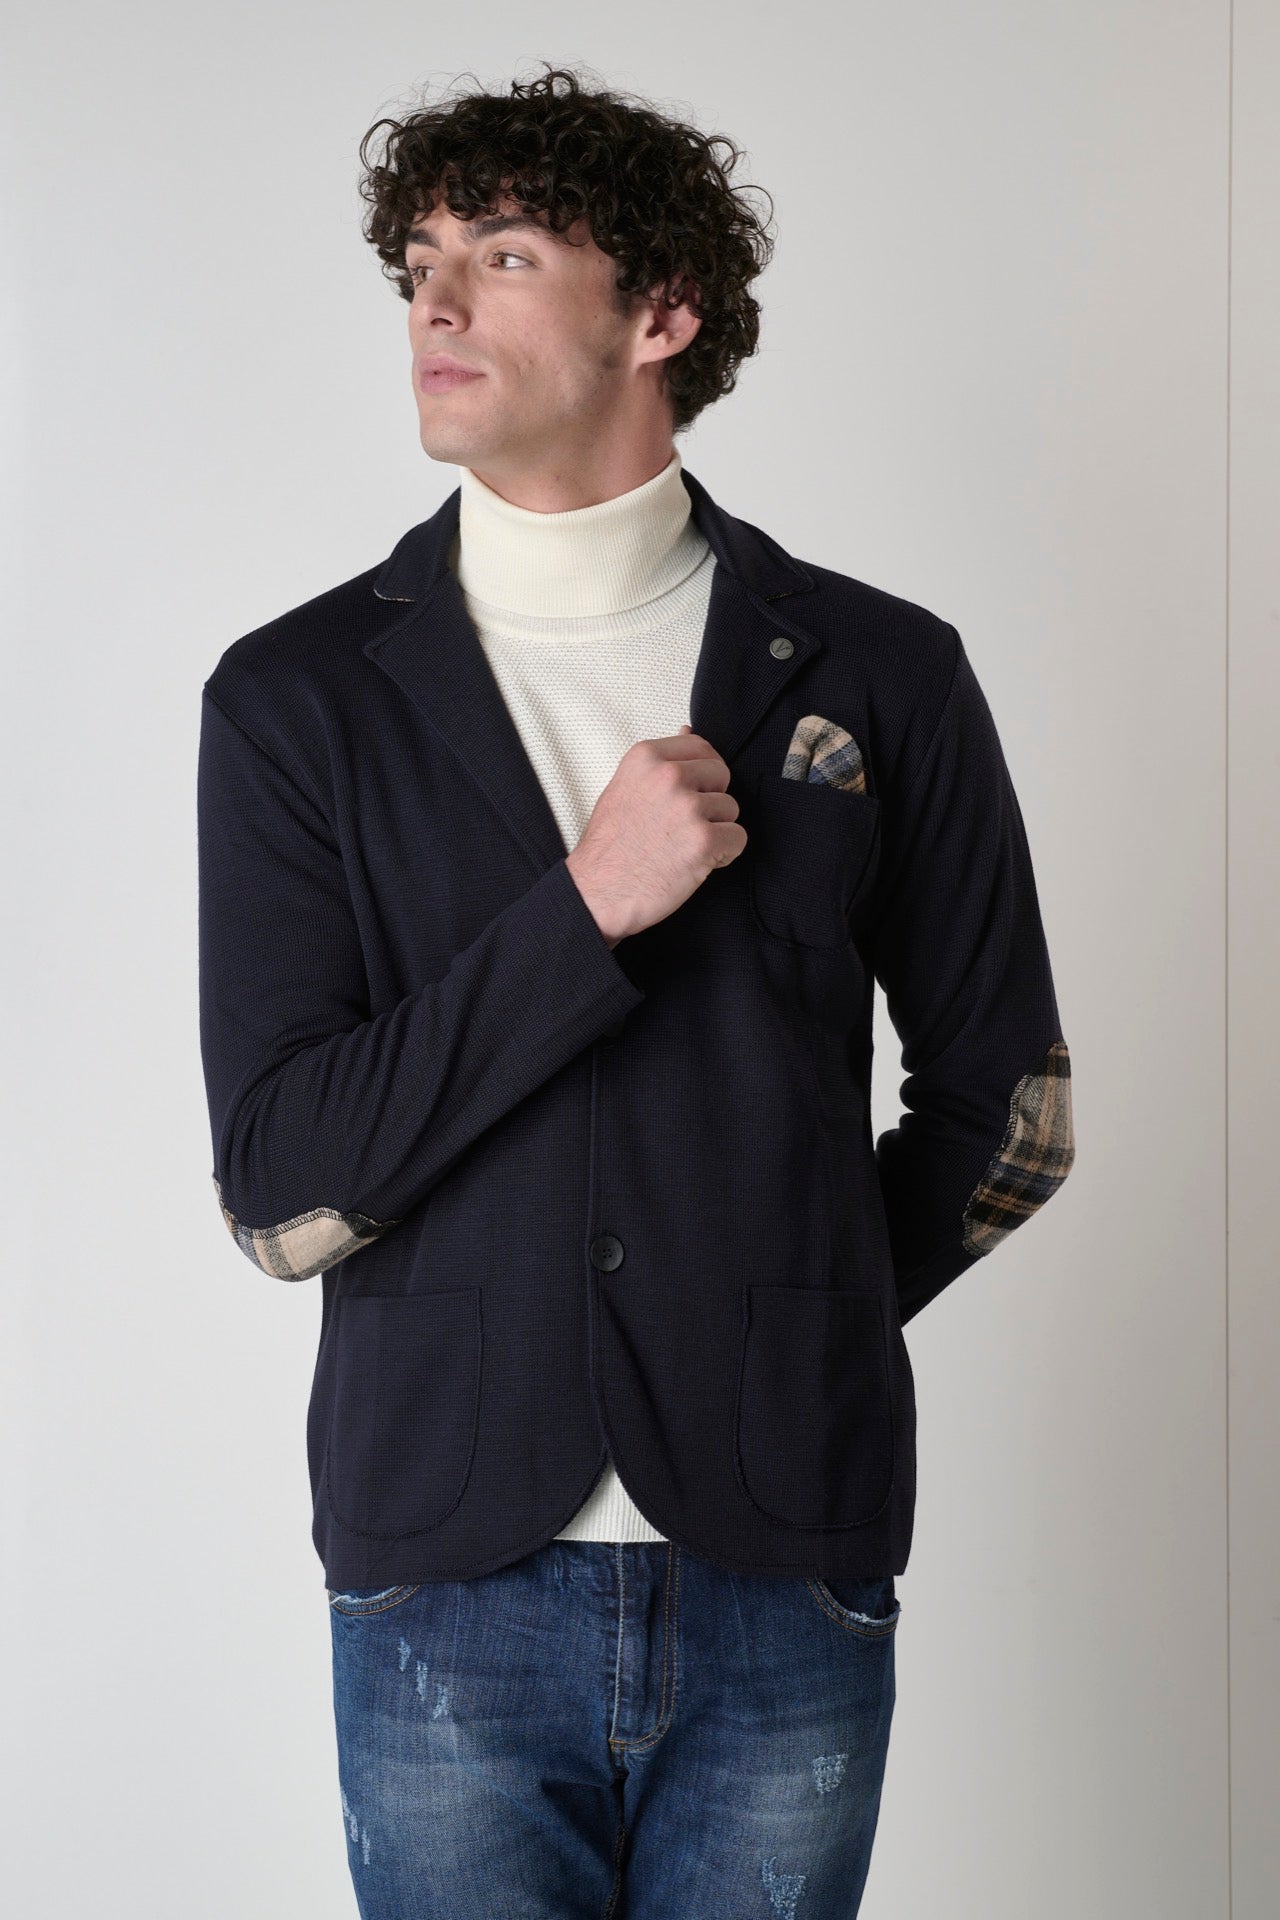 Blue single-breasted jacket with patches, inner collar and pocket square in V2 fabric